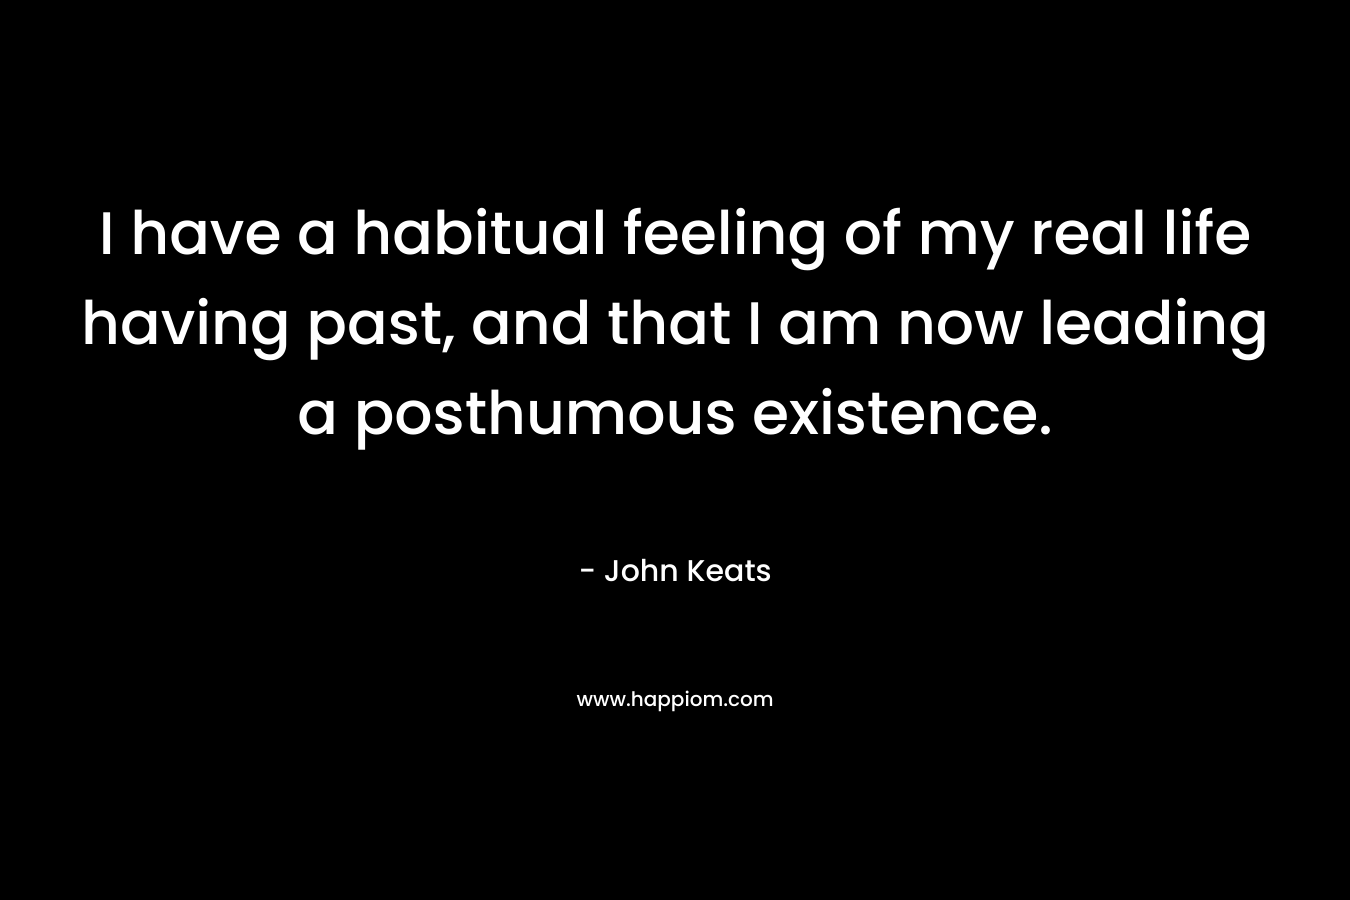 I have a habitual feeling of my real life having past, and that I am now leading a posthumous existence. – John Keats